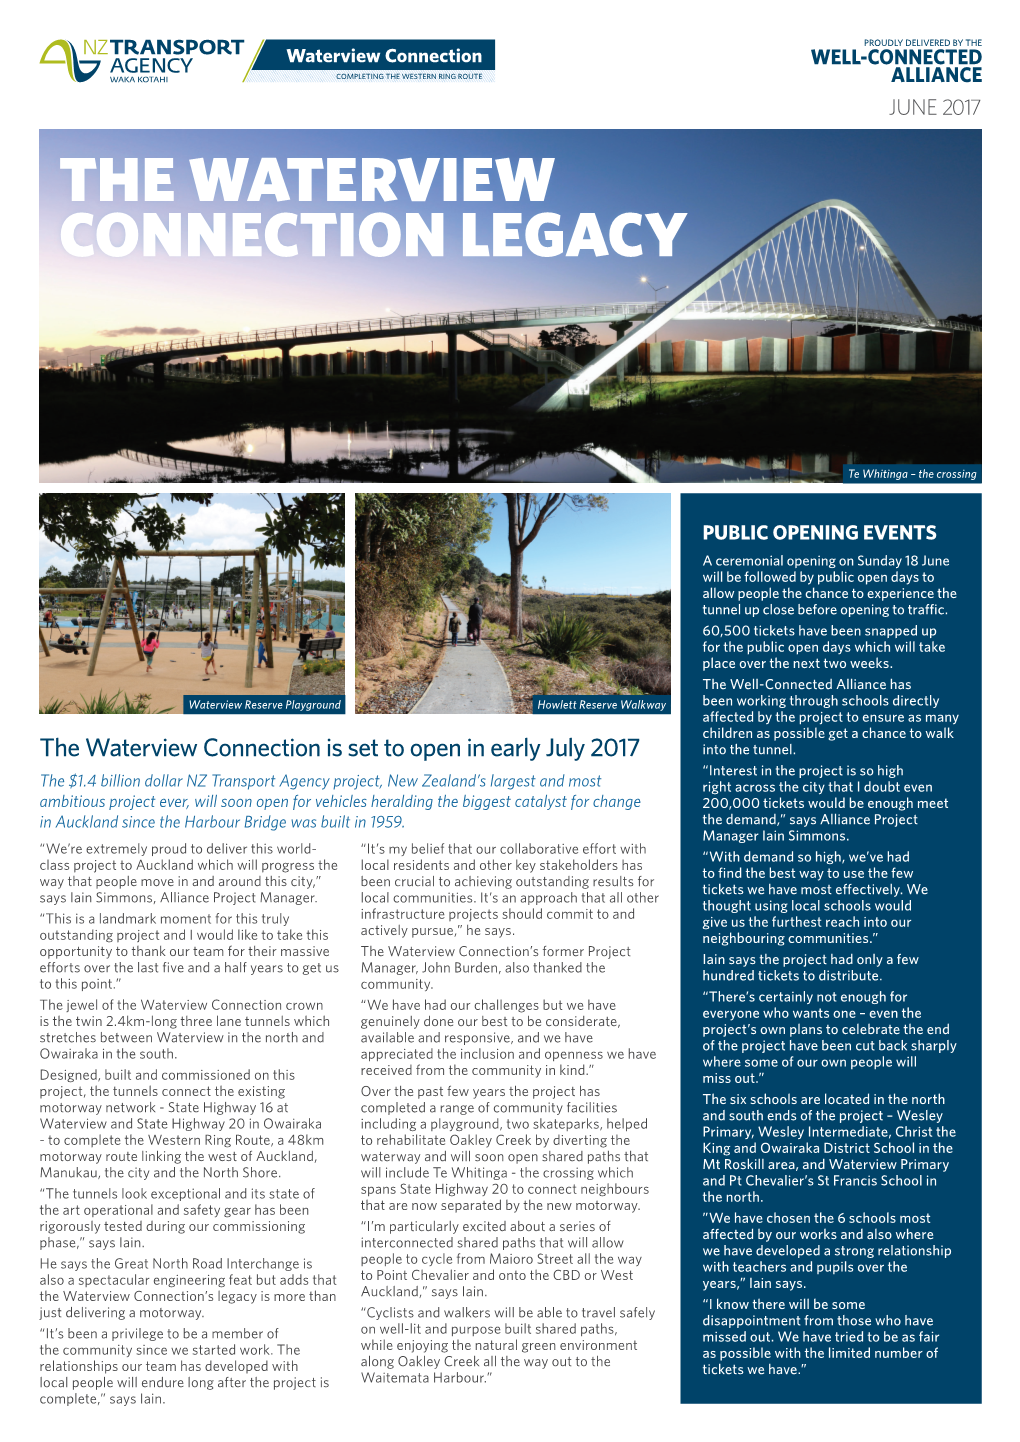 The Waterview Connection Legacy